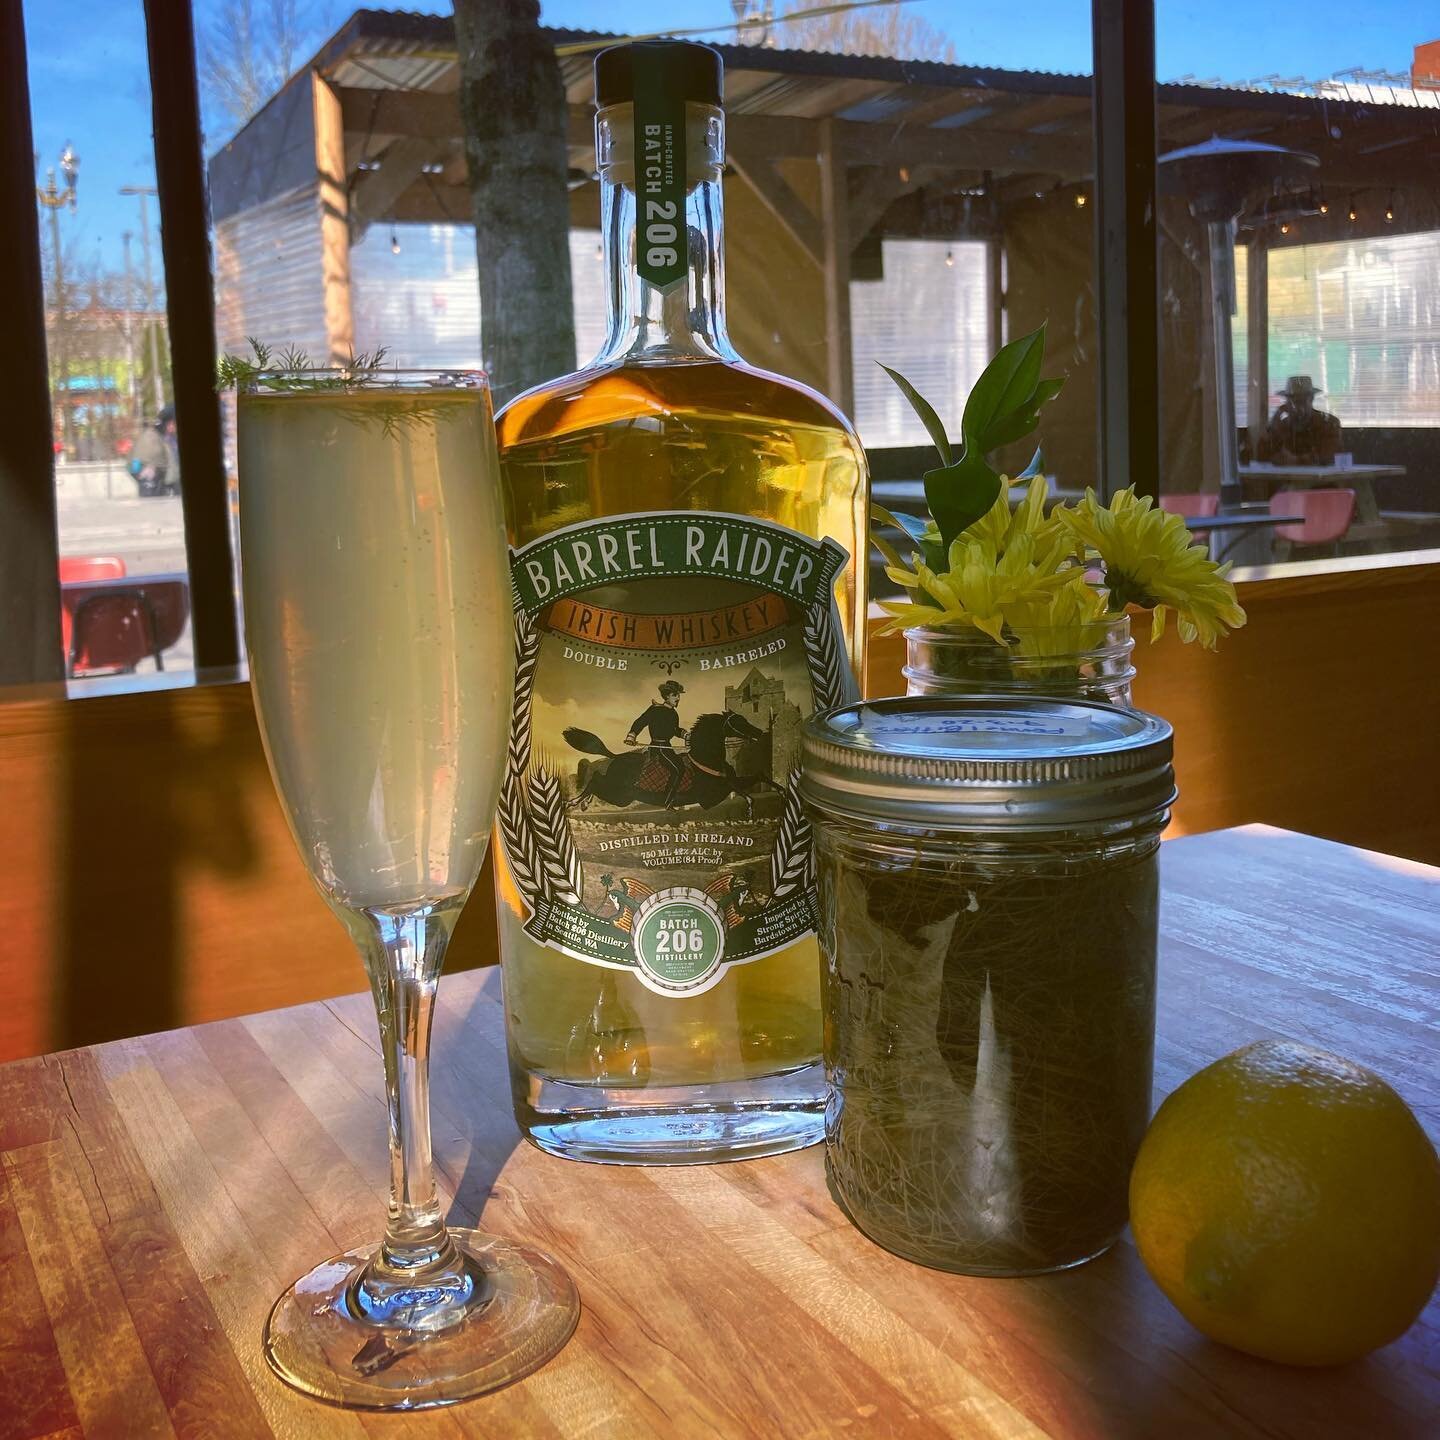 Happy St. Paddy&rsquo;s Day gang!! ☘️☘️ To celebrate we have a fun Irish twist on a popular classic!
An IRISH 75 !☘️ 
Barrel Raider Irish Whiskey, lemon &amp; handmade fennel bitters topped with bubbles!
Come get one while they last! 💚
#vanwa #vanco